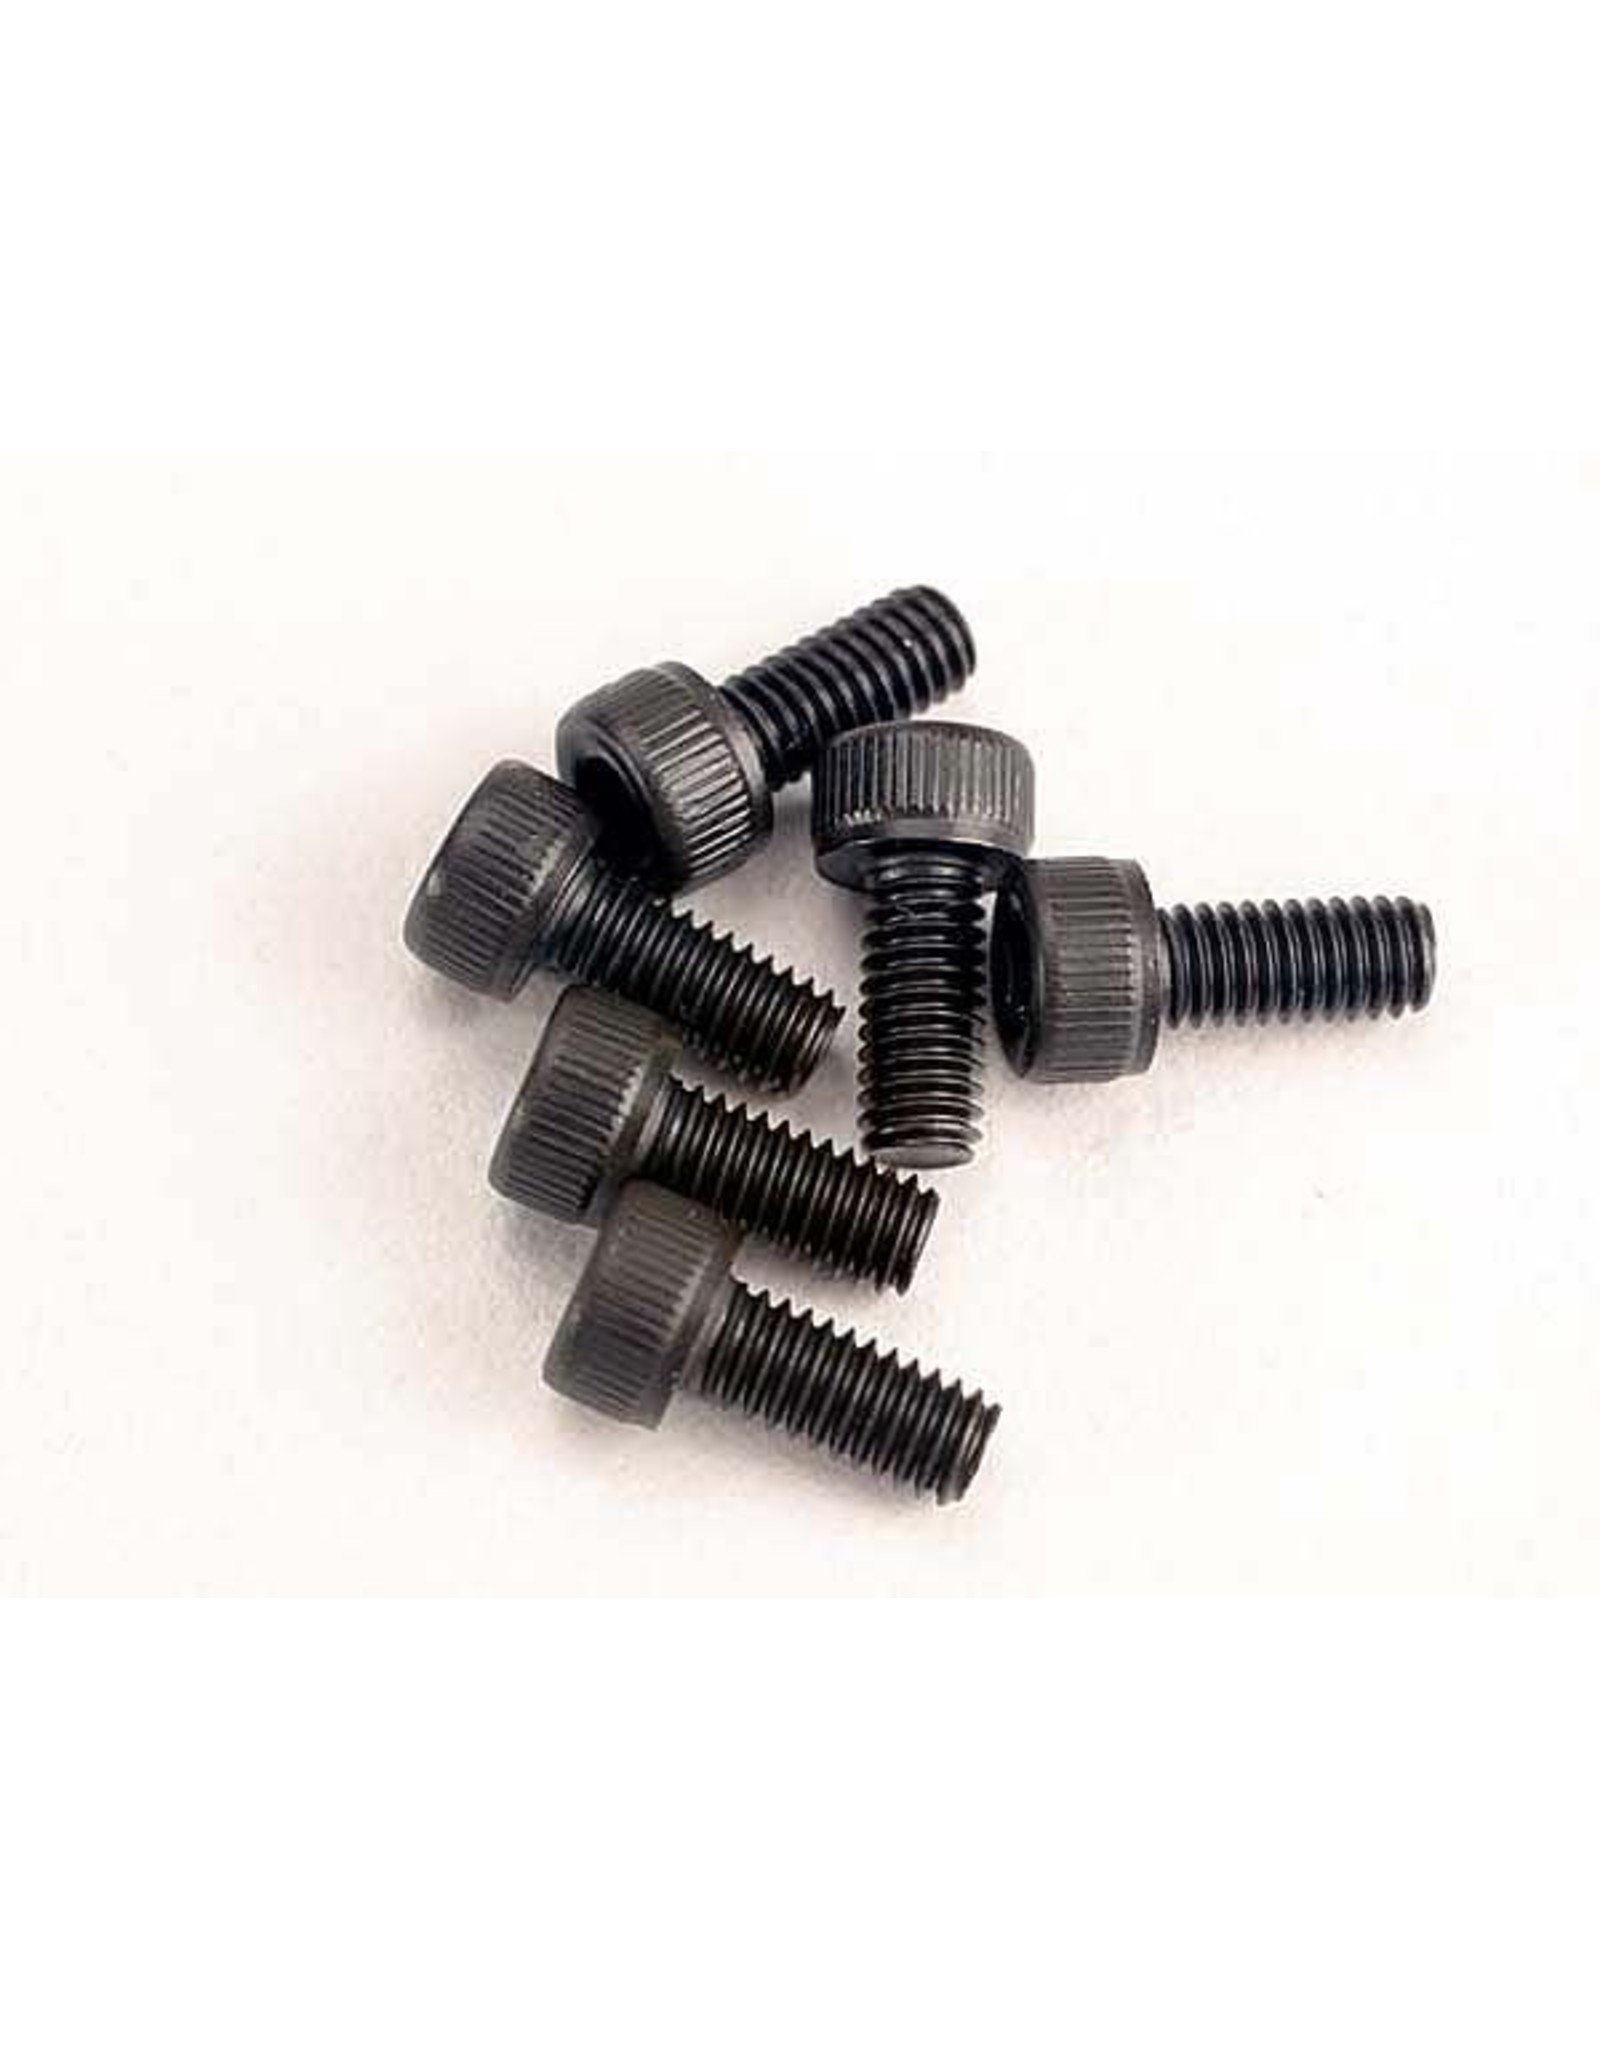 Kyosho Ball Diff Ring Gear   (MBW0282)